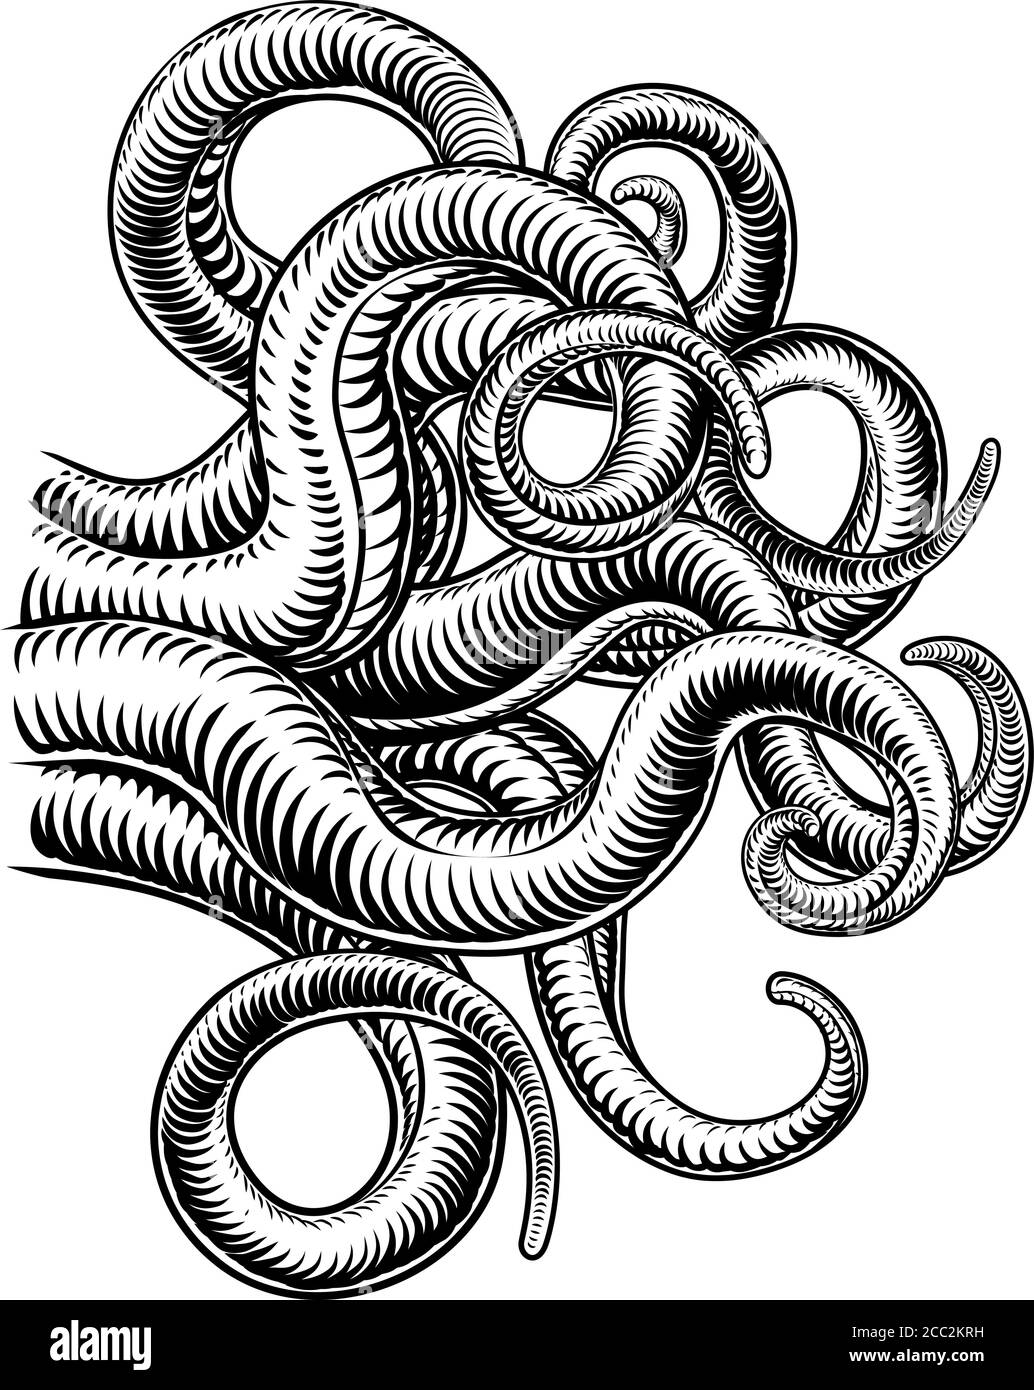 Octopus Cthulhu Squid Monster Tentacles Woodcut Stock Vector